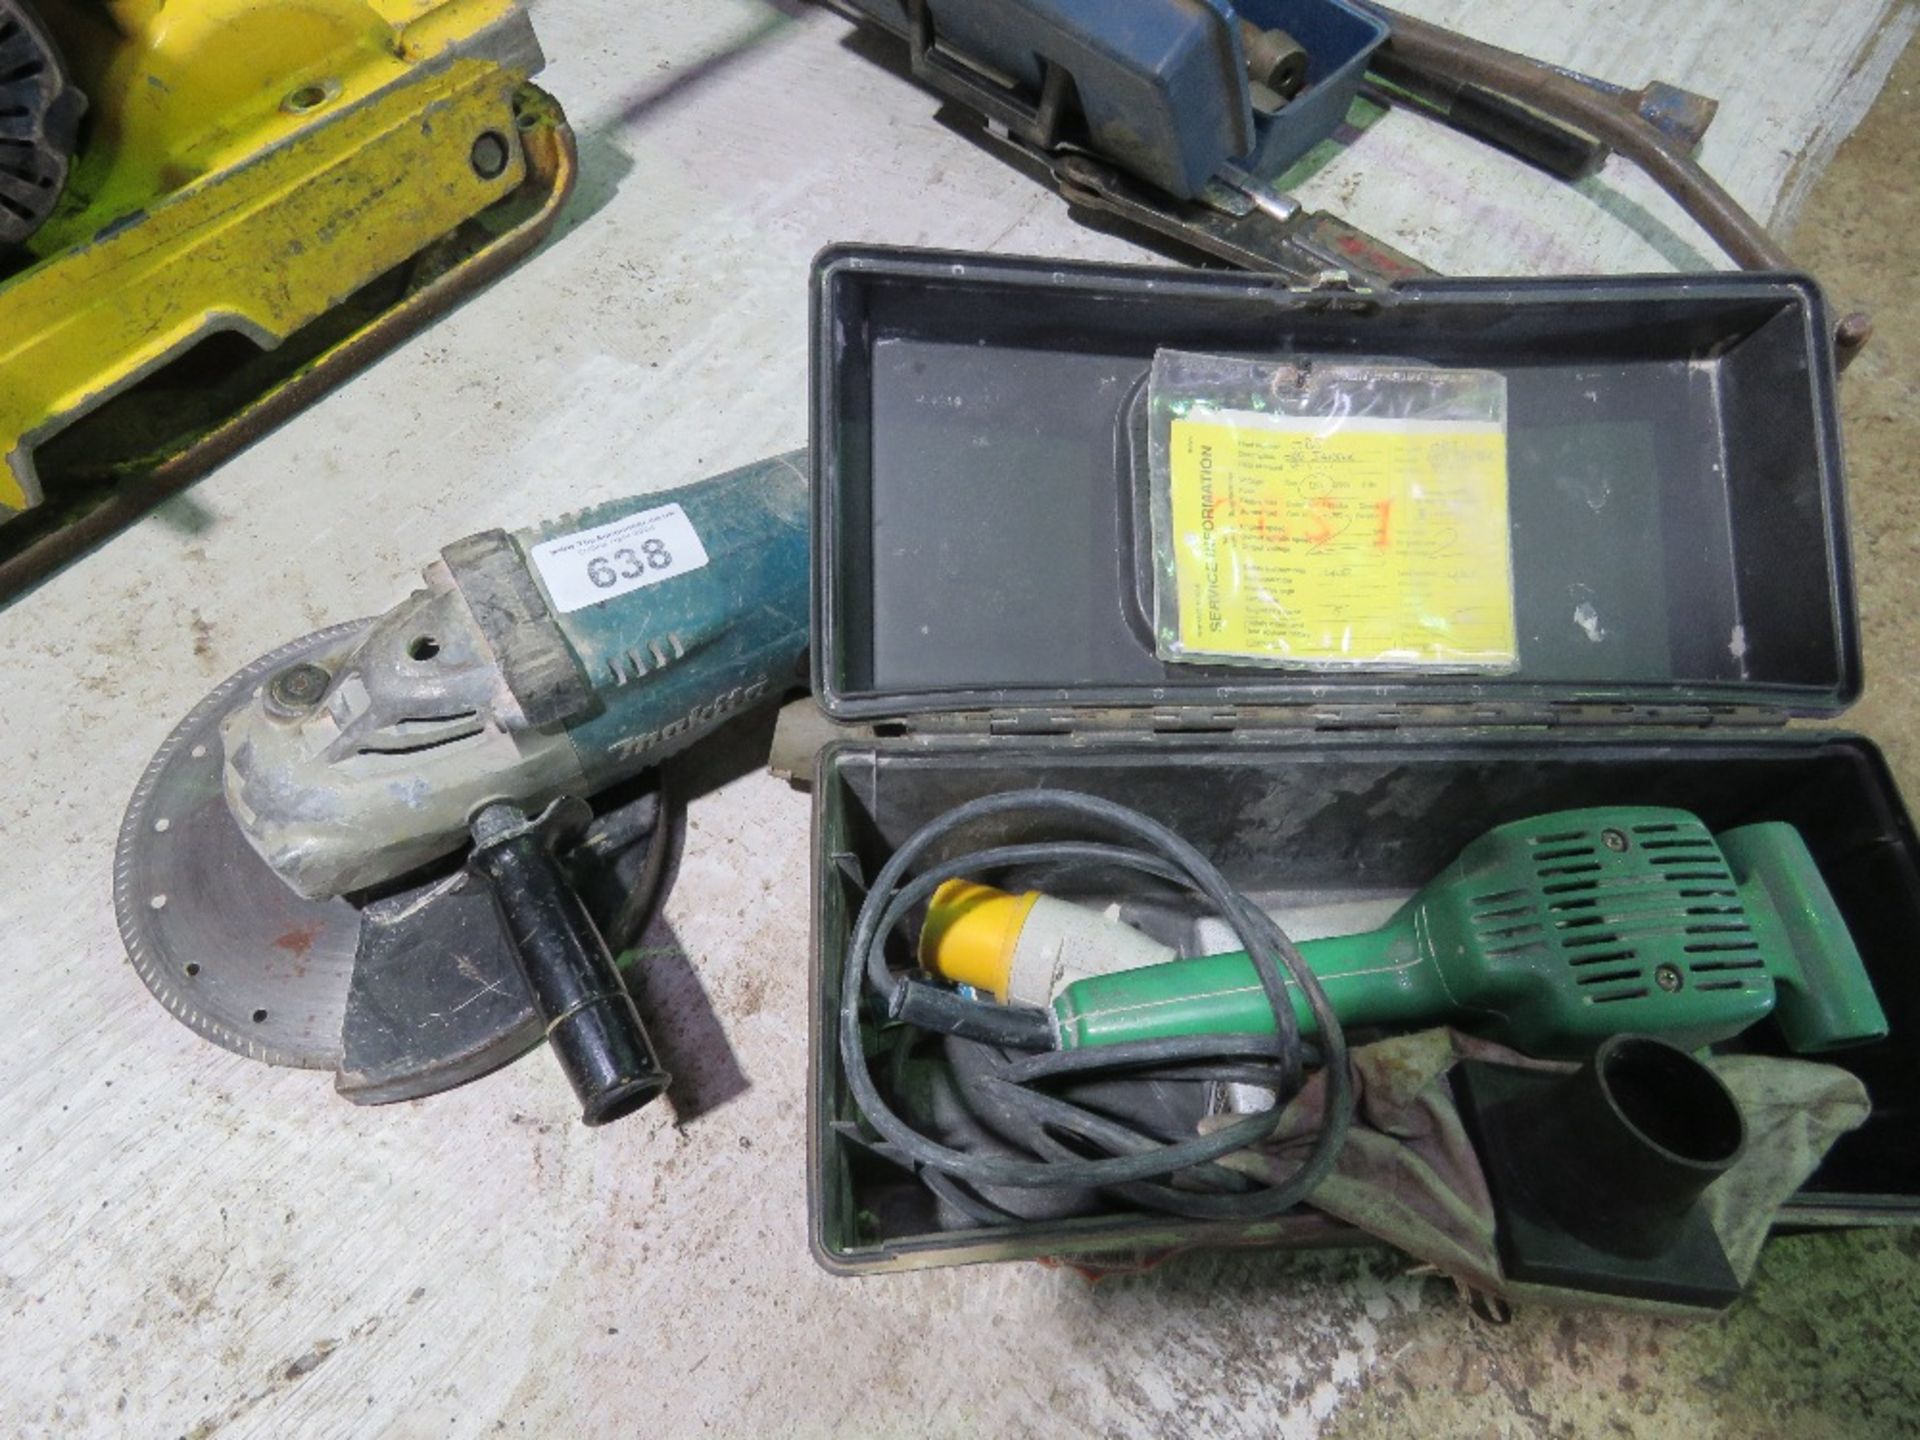 SANDER PLUS A GRINDER, 110VOLT POWERED.....THIS LOT IS SOLD UNDER THE AUCTIONEERS MARGIN SCHEME, THE